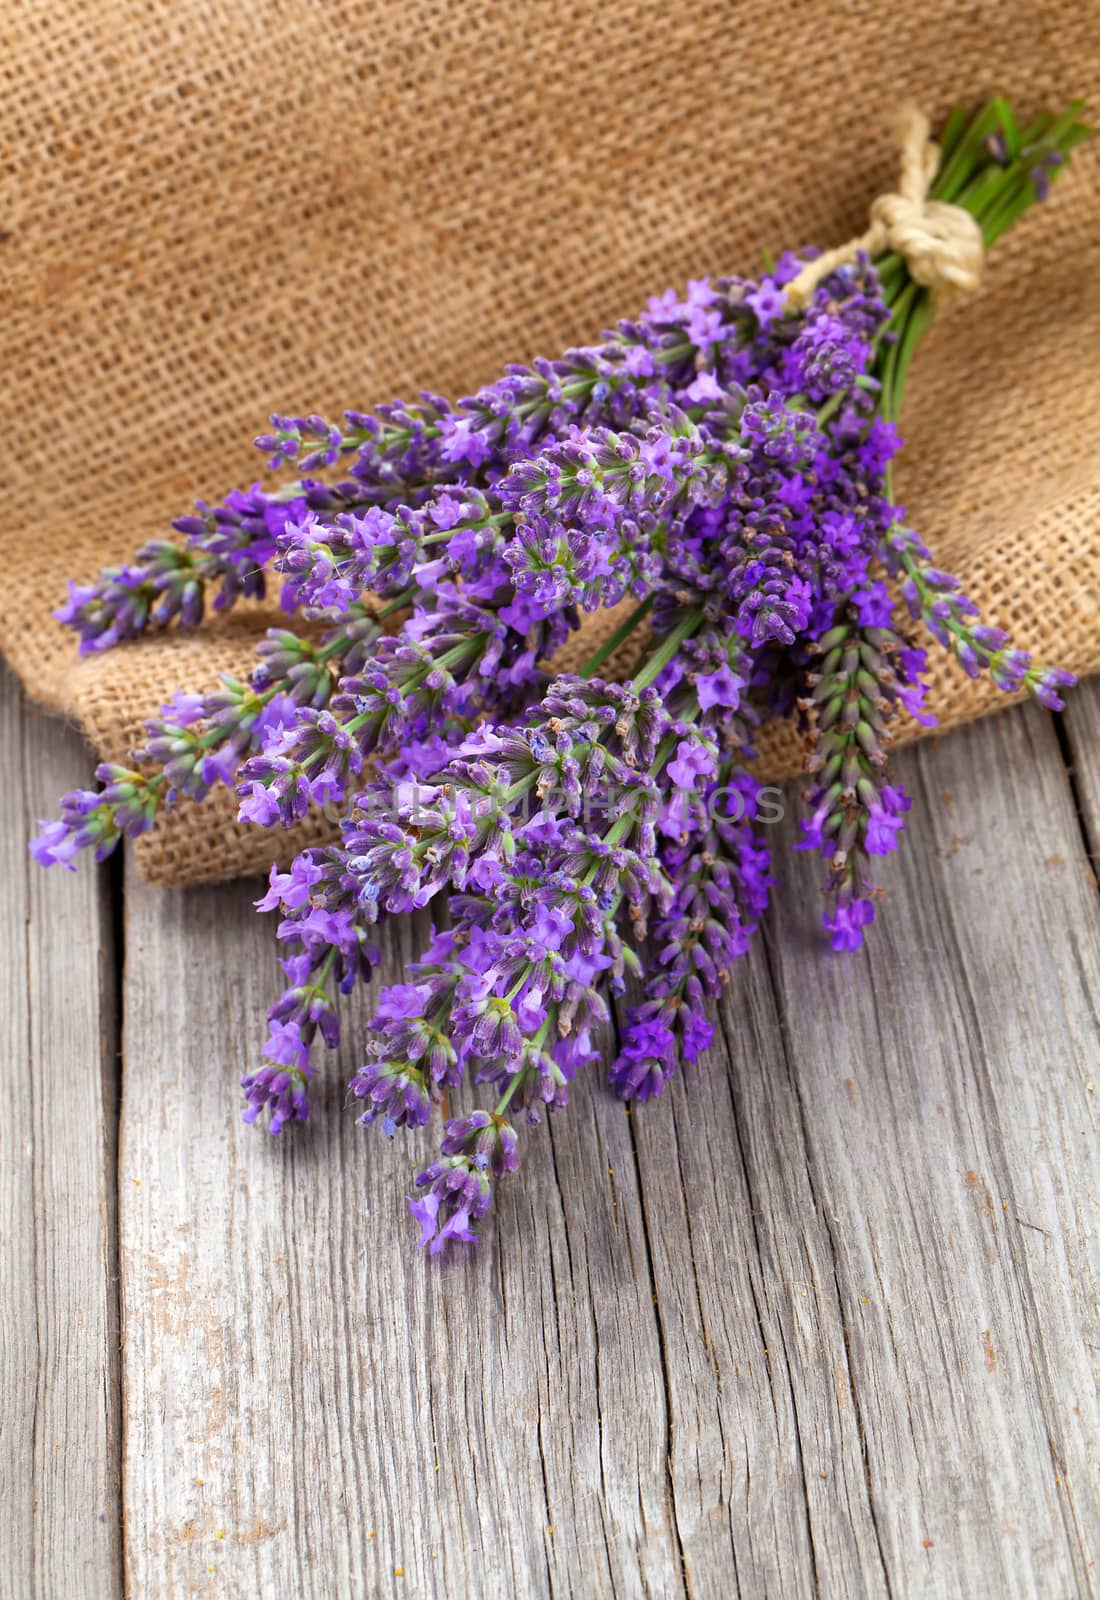 lavender flowers in a basket with burlap on the wooden backgroun by motorolka